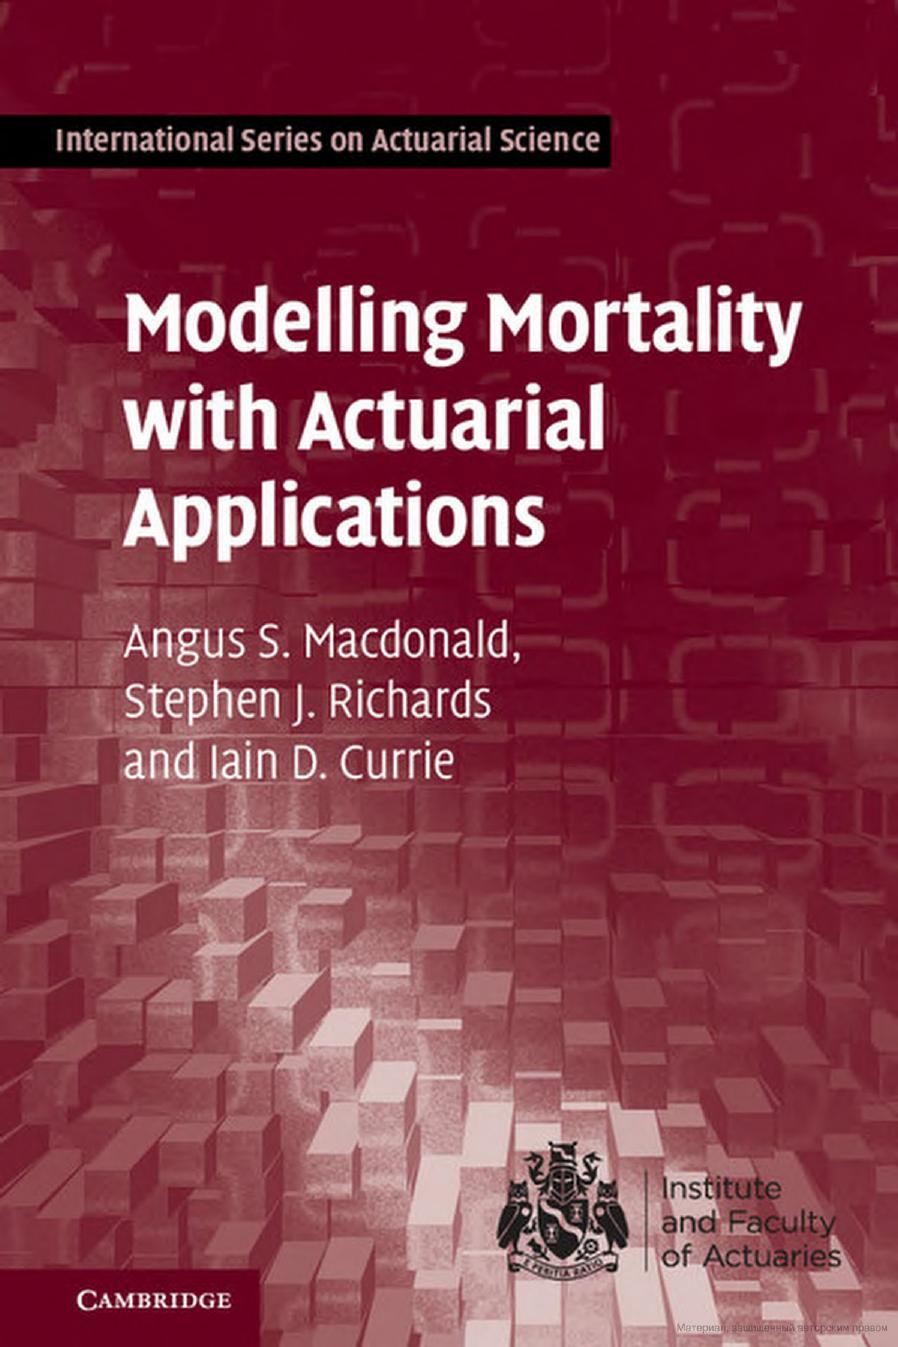 (eBook PDF)Modelling Mortality with Actuarial Applications by Angus S. Macdonald,Stephen J. Richards,Iain D. Currie